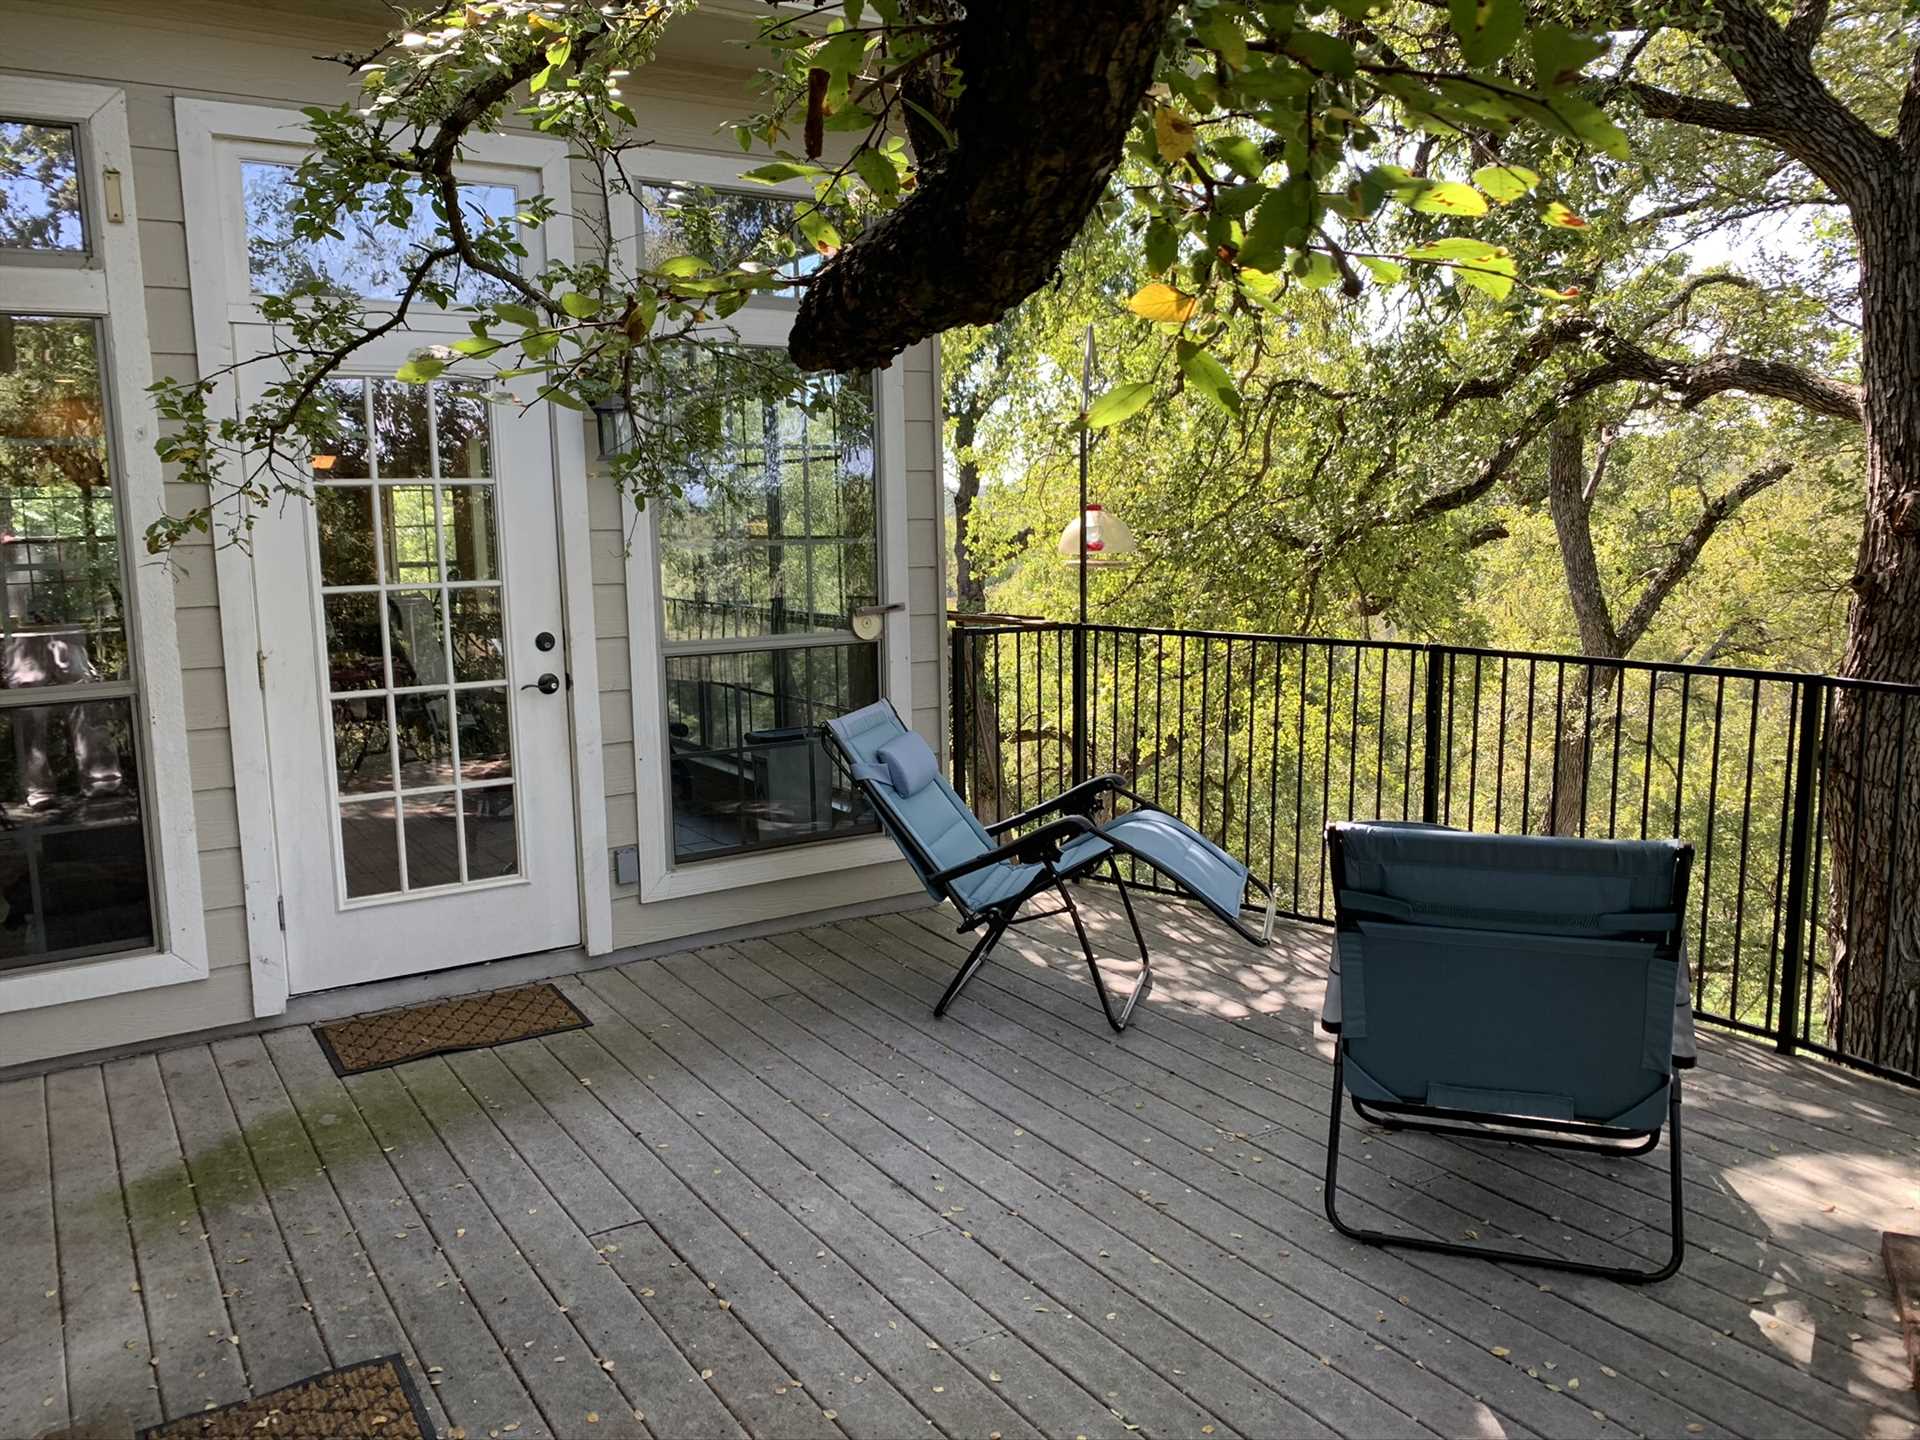                                                 The tree-shaded patio is located up high, for stunning views! Kids and pets are protected on the patio by sturdy fencing. Please note that the path down to the river from here can be steep and occasionally slippery.